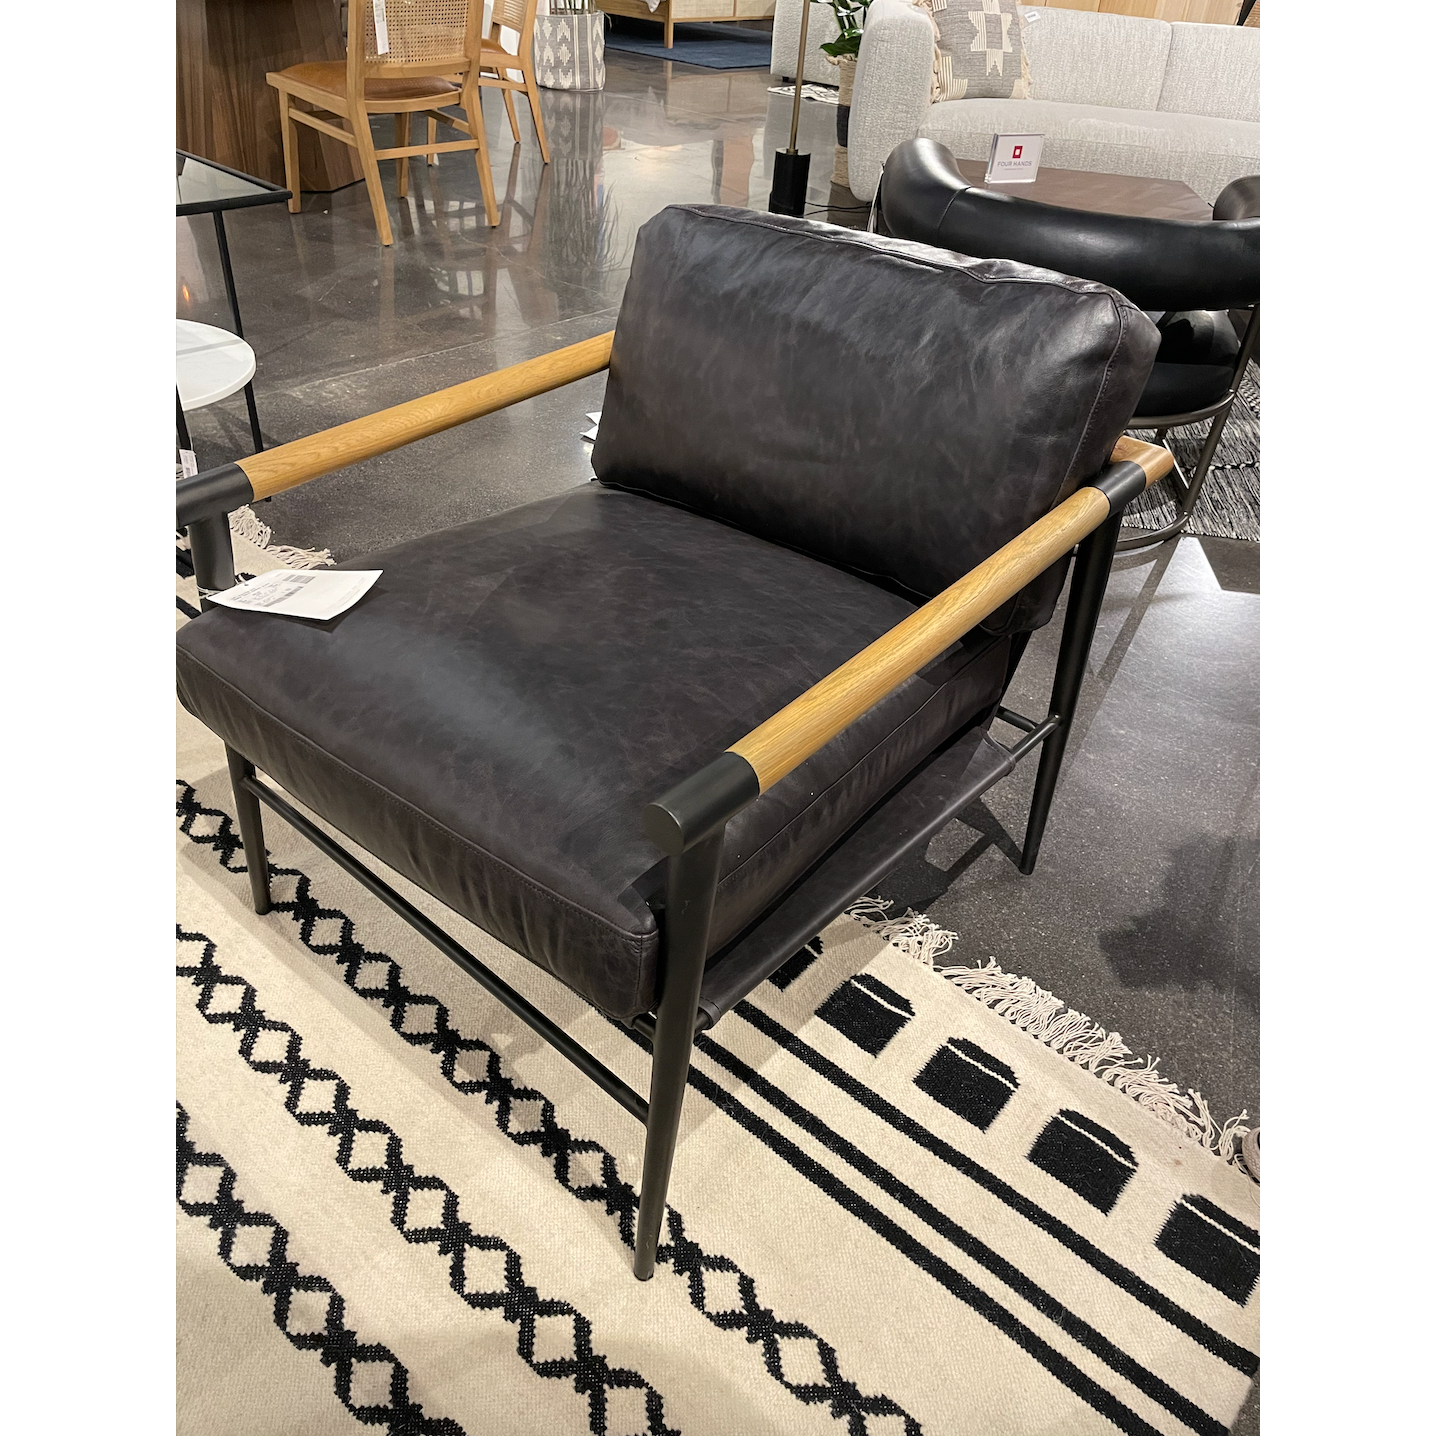 This Rowen Chair - Sonoma Black has buttery black seating of top-grain leather, with angular arms of exposed oak providing fresh contrast. A comfy, modern chair to add to any living room, bedroom, or other area.   Overall Dimensions: 27.50"w x 32.00"d x 31.00"h